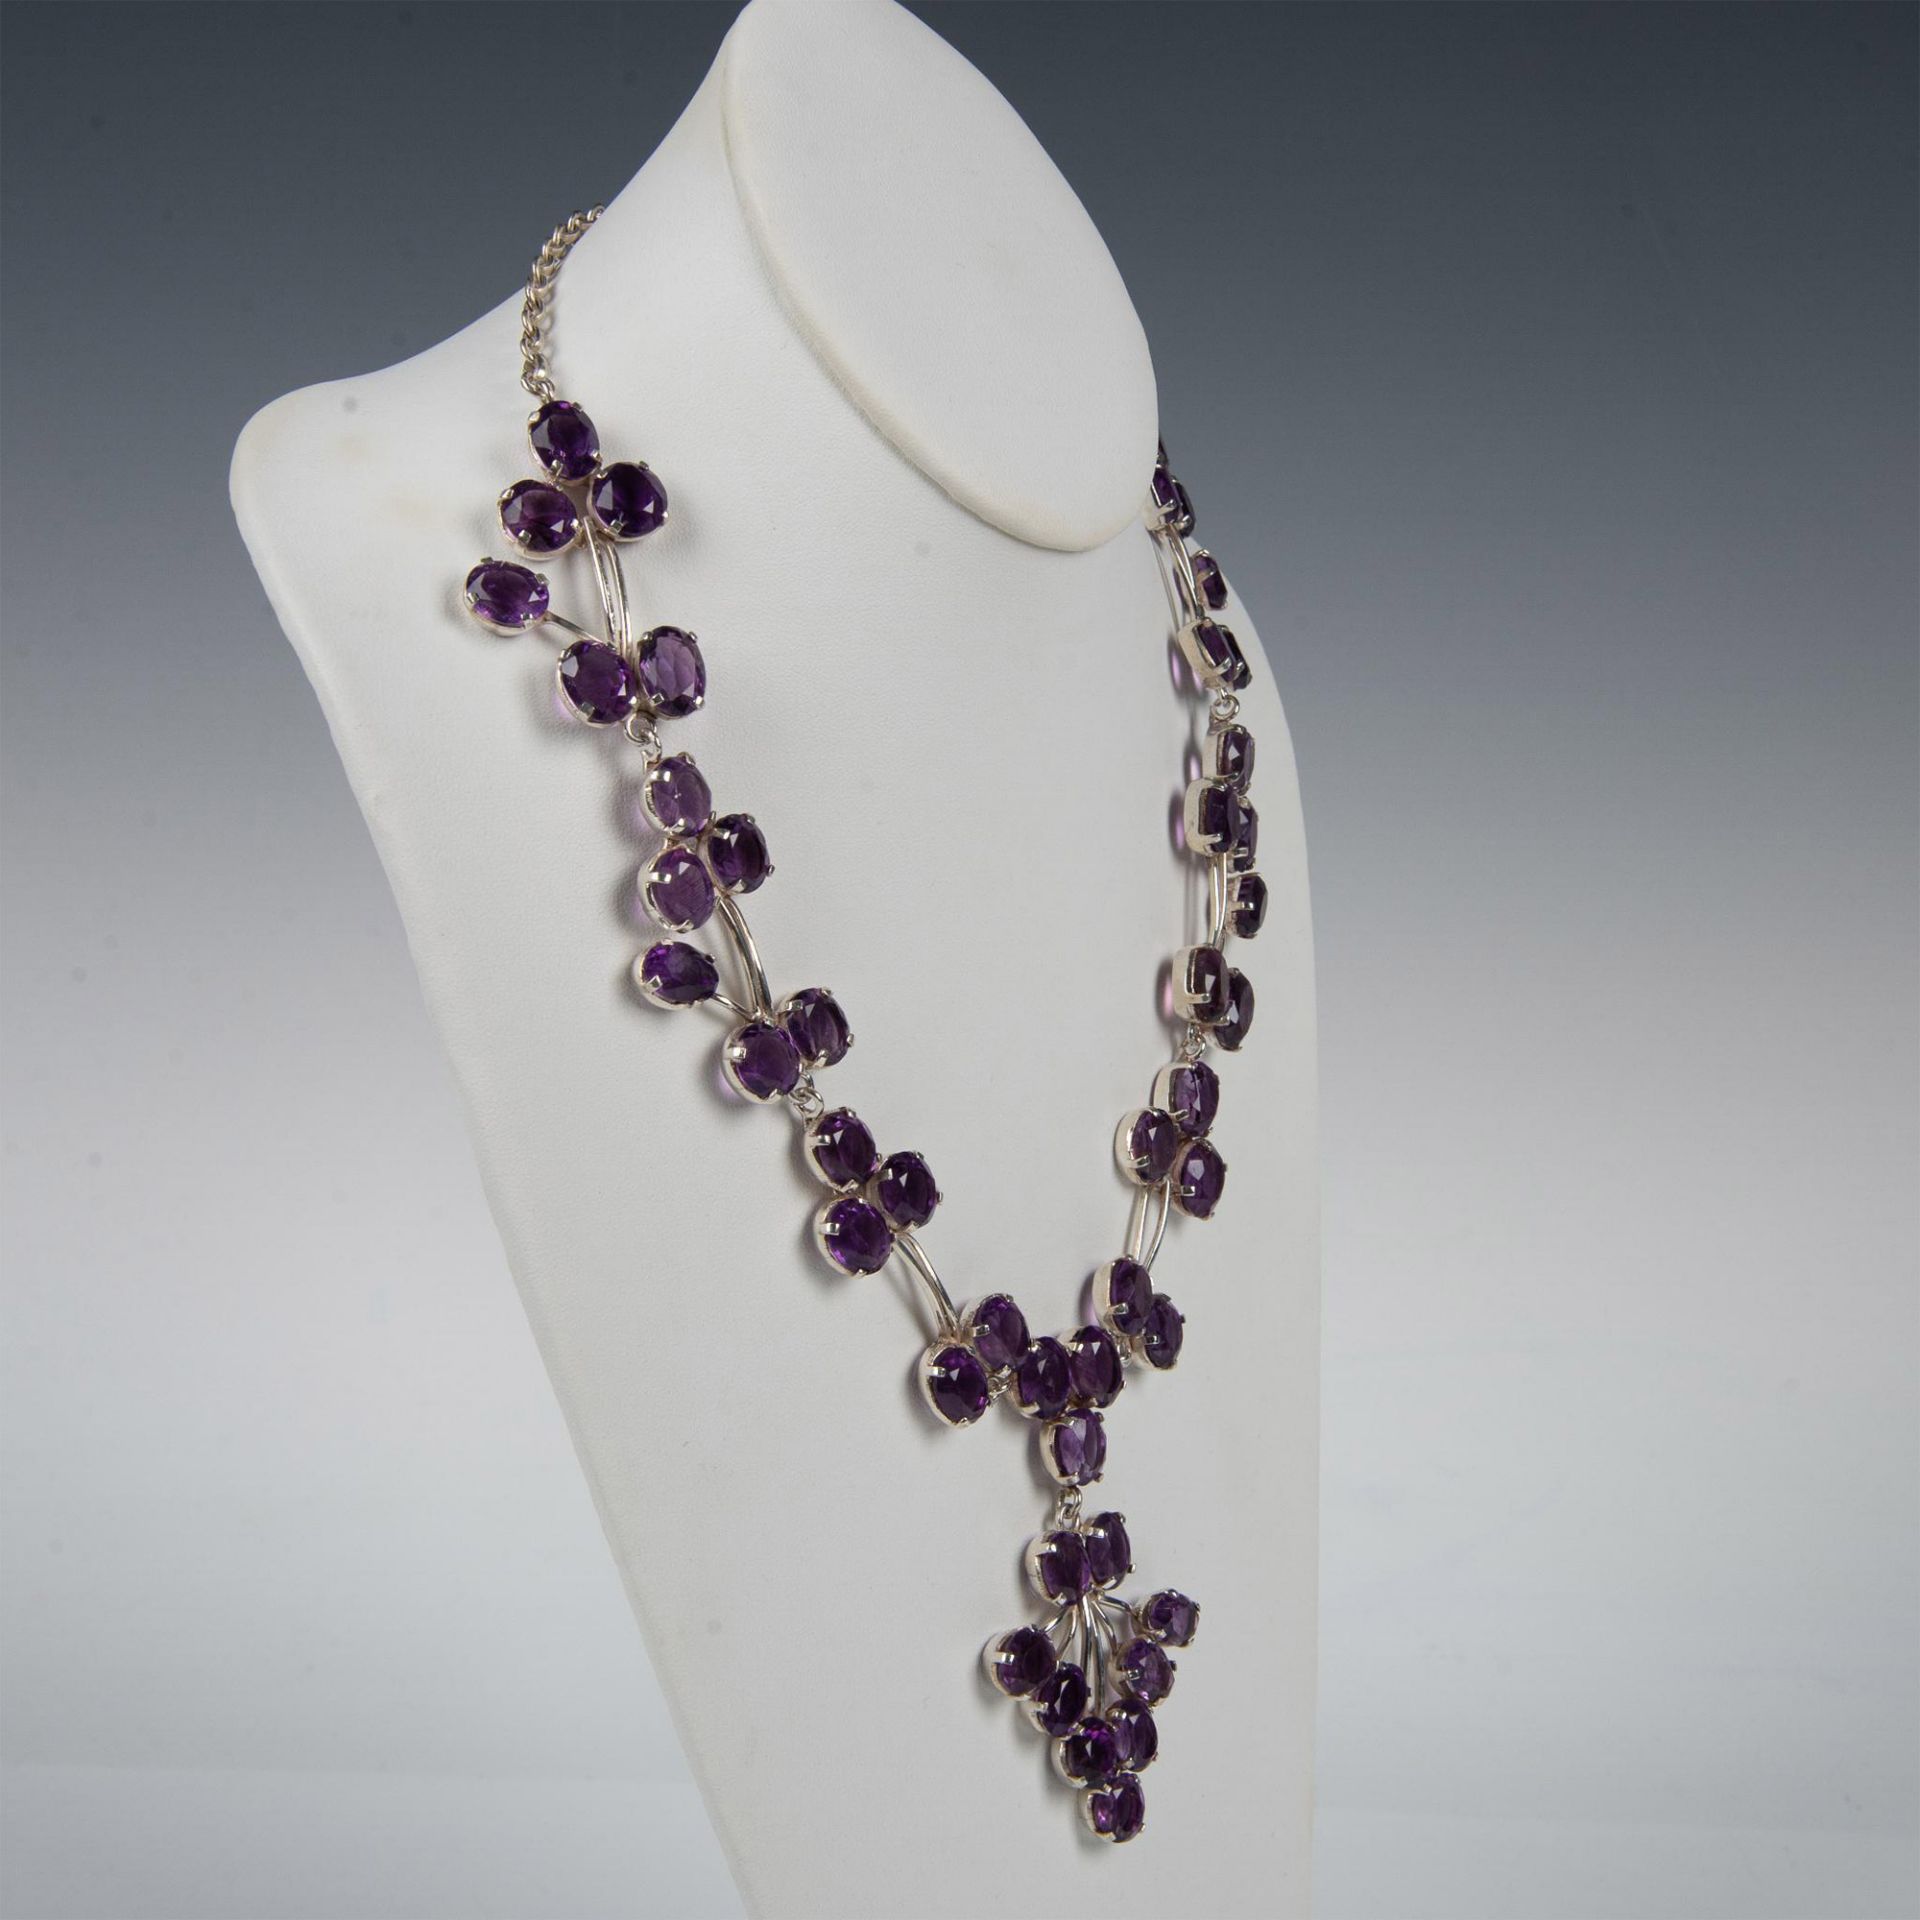 Exquisite Sterling Silver & Lab Amethyst Statement Necklace - Image 3 of 12